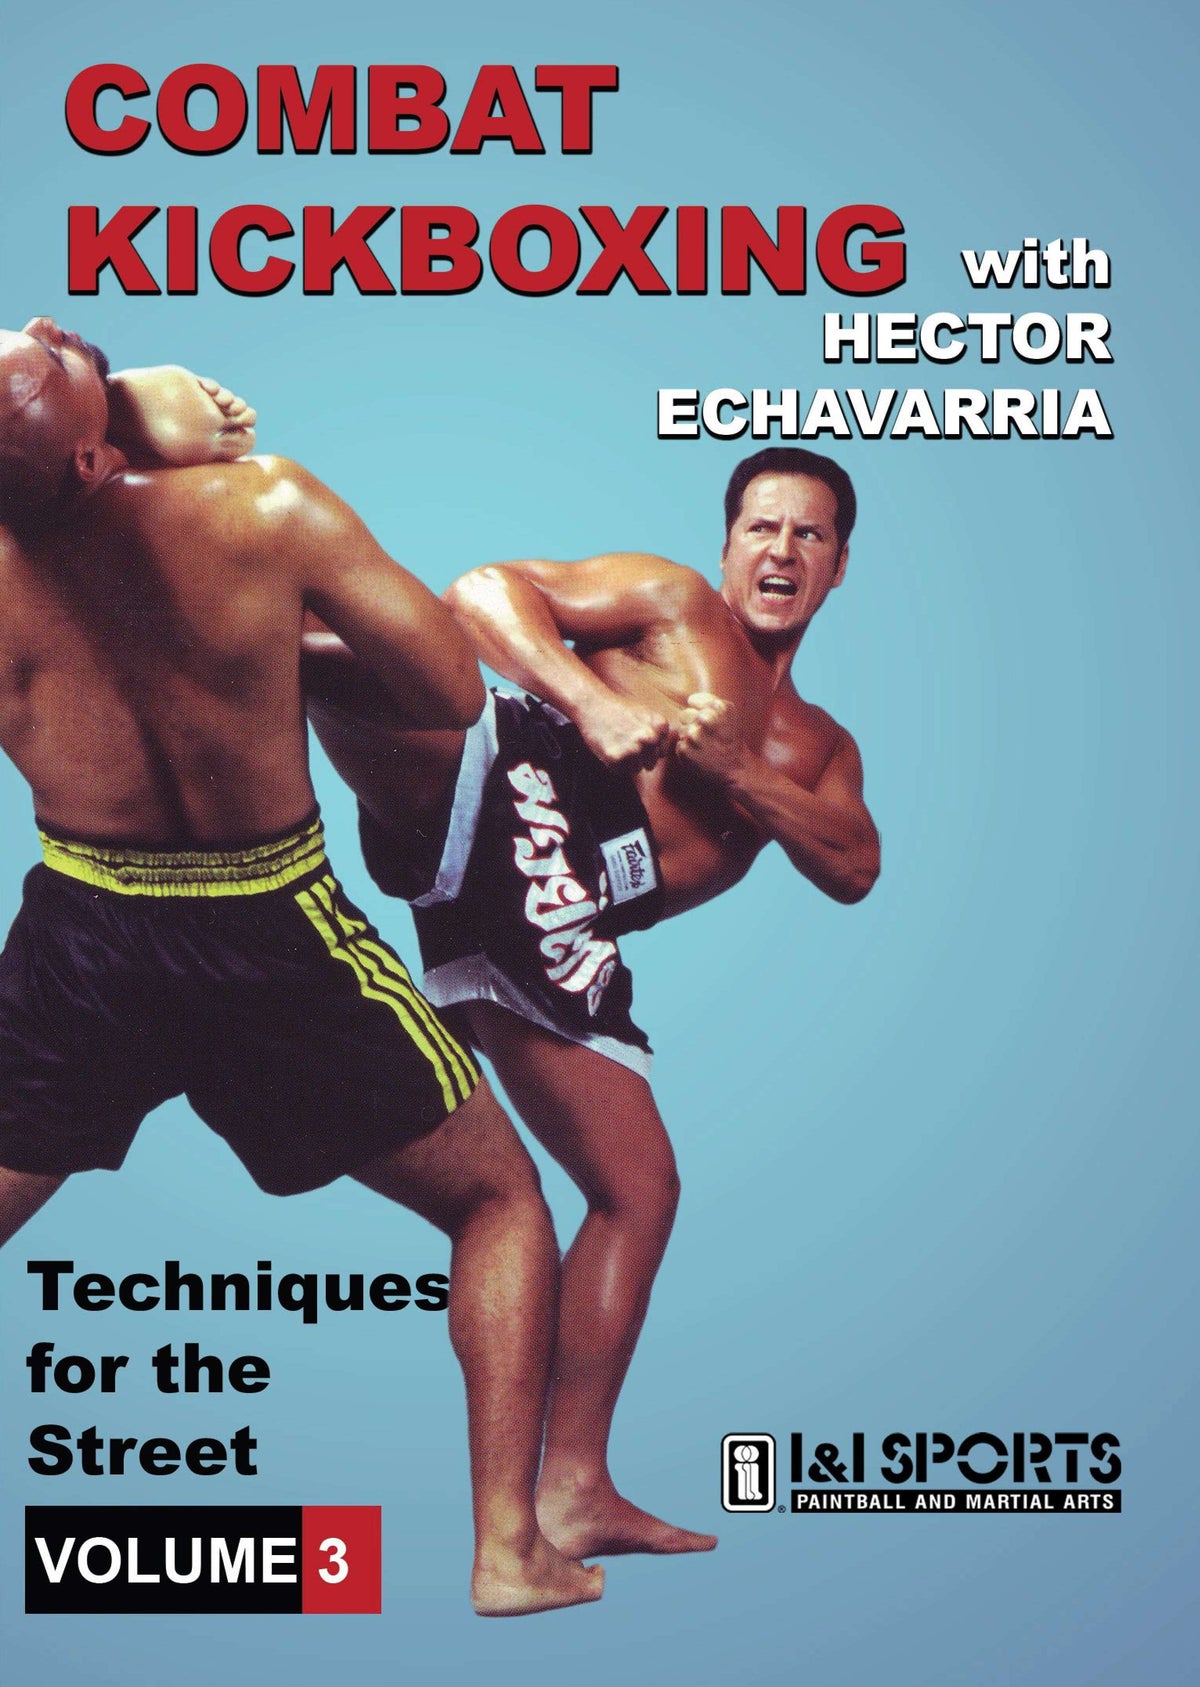 Combat Kickboxing #3 Techniques for the Street DVD Hector Echavarria